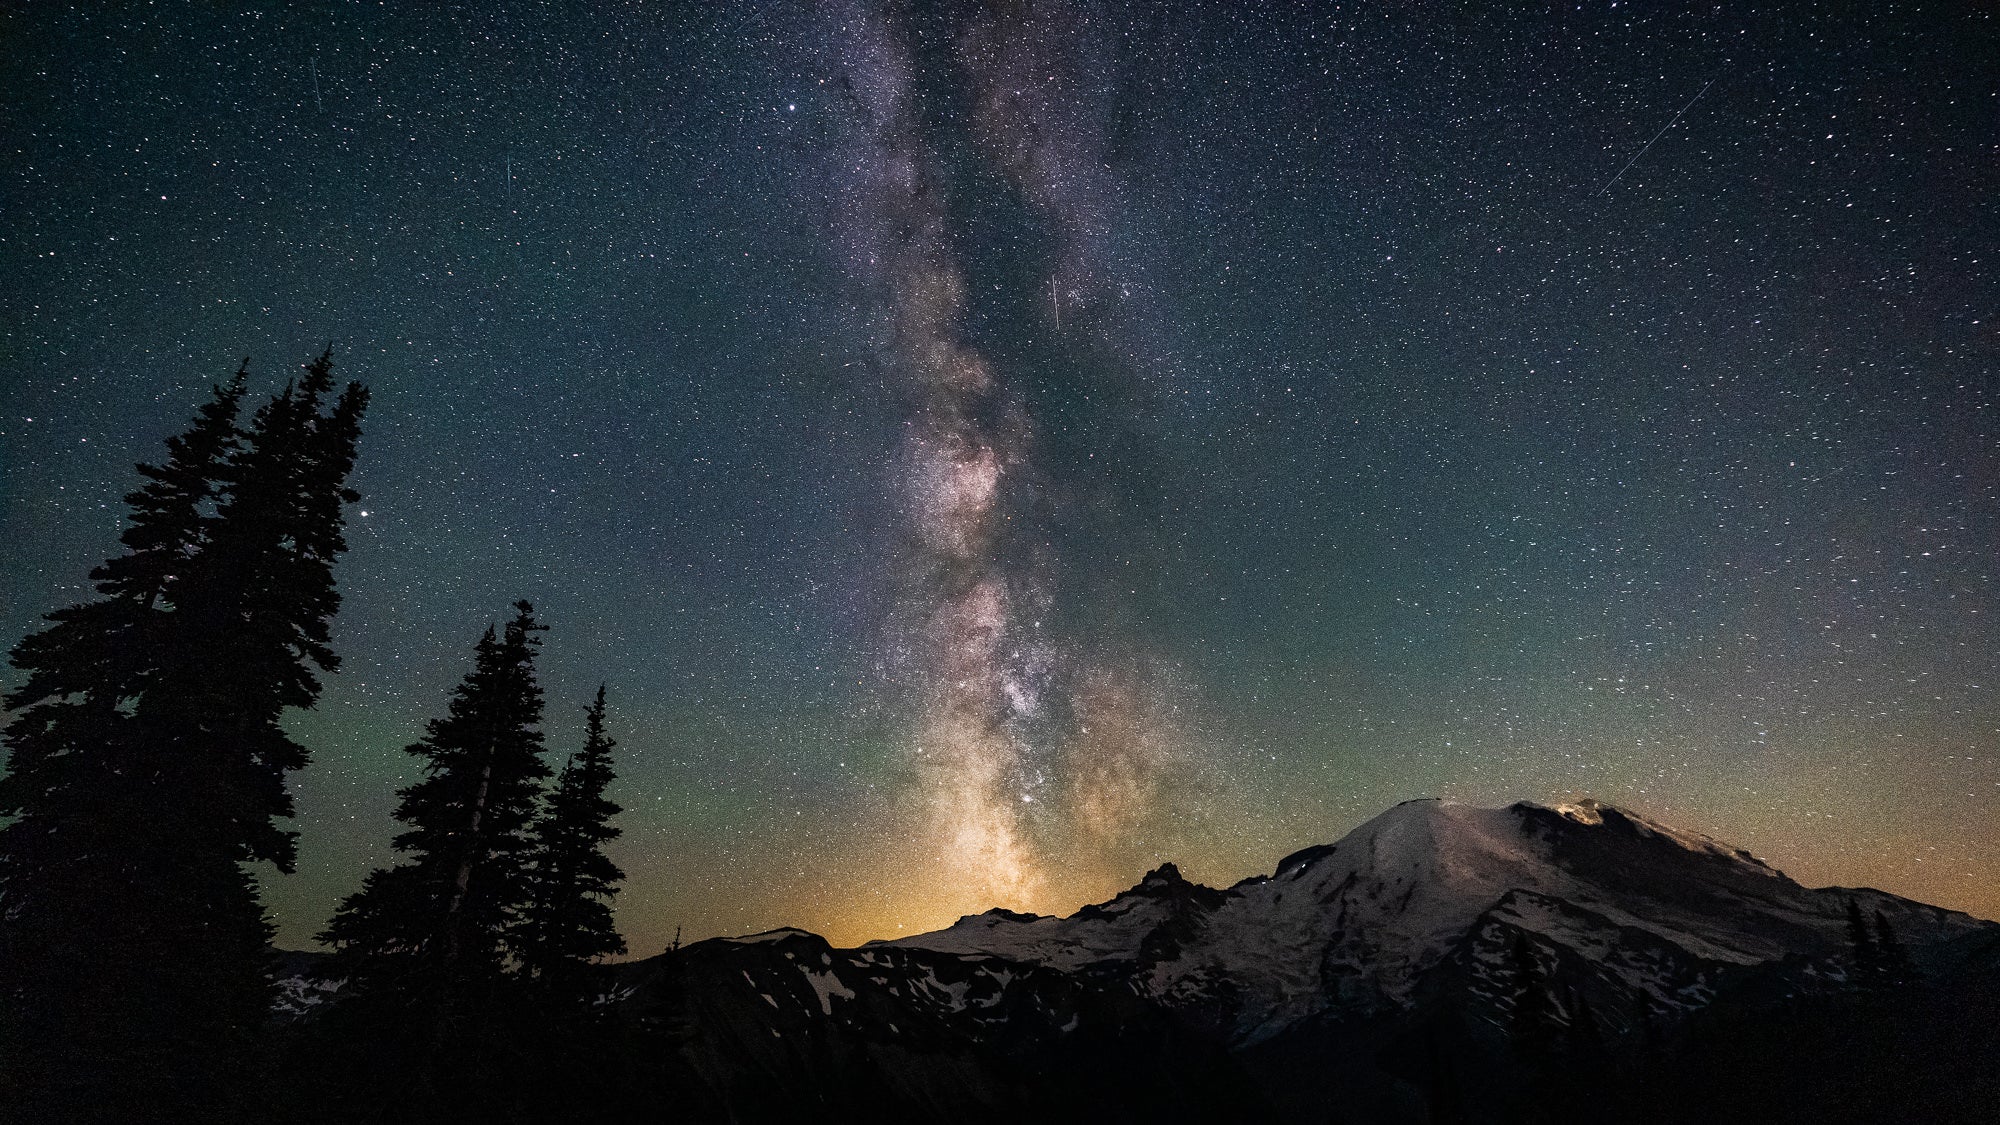 The core of the Milky Way setting behind Mount Rainier in Washington State. Photo by Dylan McMains. Sony Alpha 7 III. Sony 16-35mm f/2.8 G Master. 13-sec., f/2.8, ISO 12,800